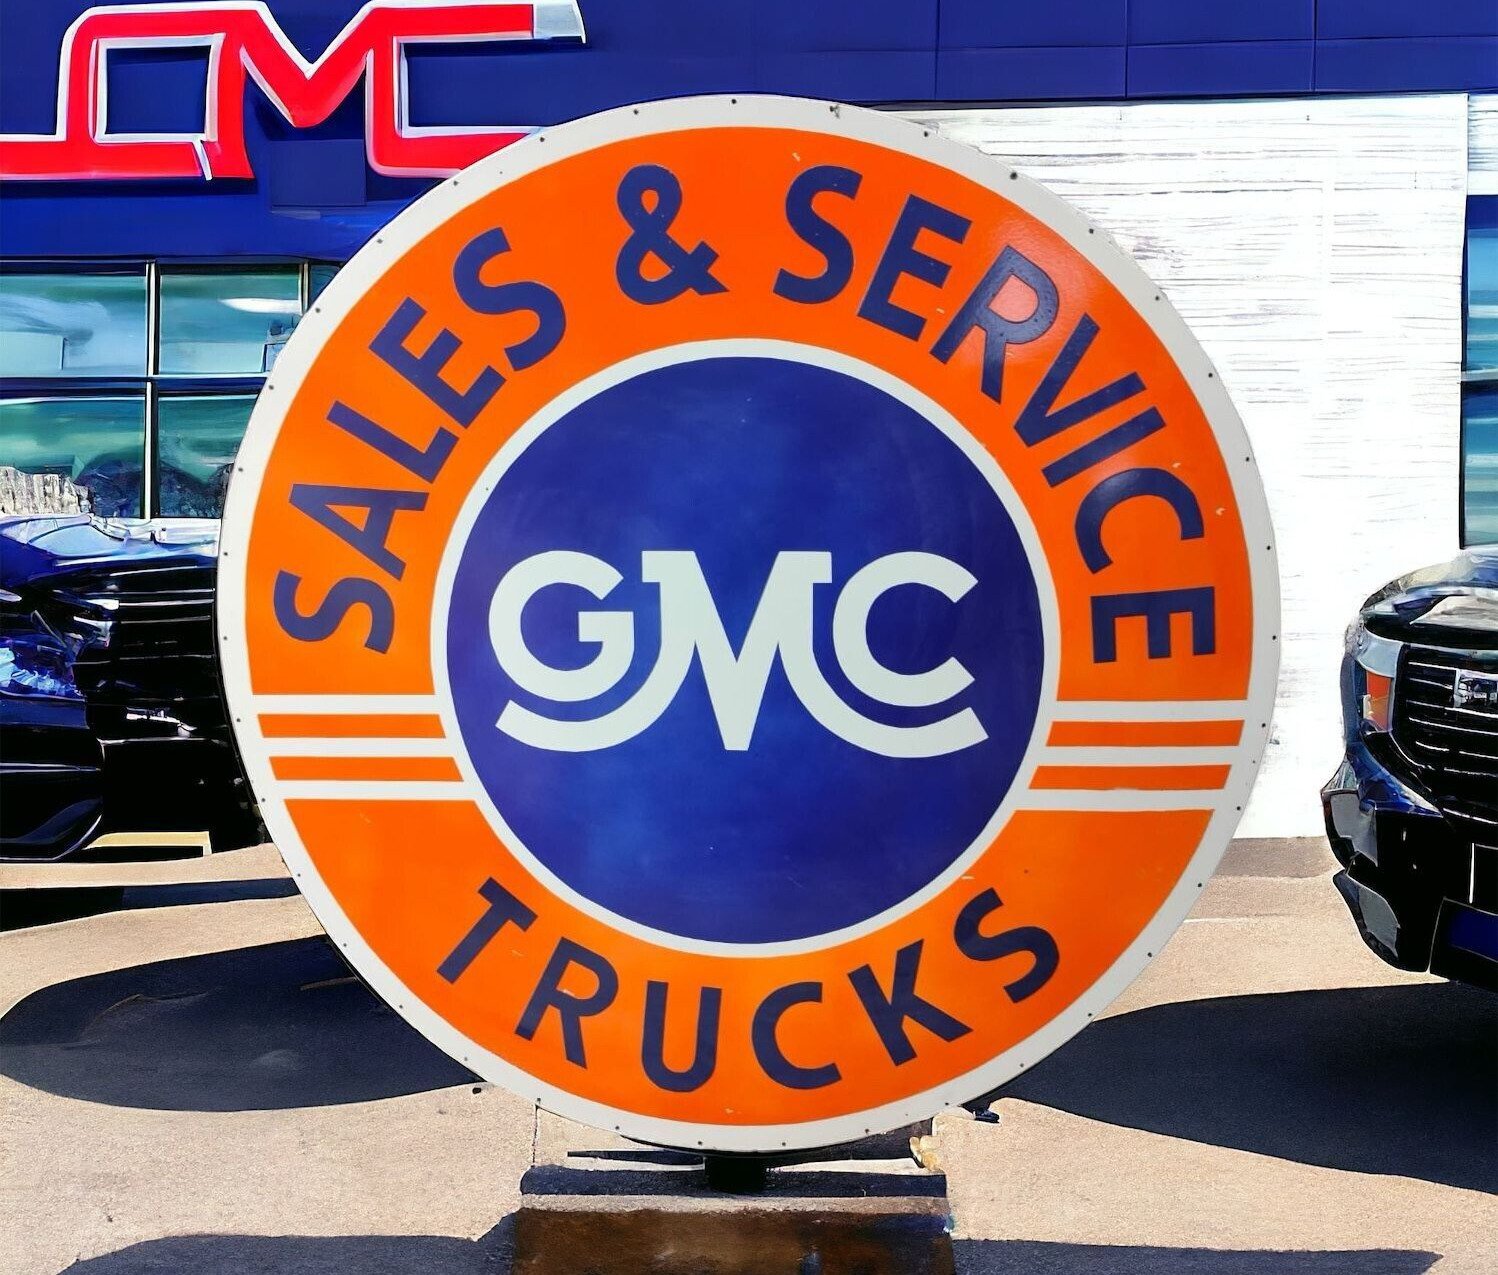 GMC TRUCKS SALES AND SERVICE 6 FEET ROUND PORCELAIN ENAMEL SIGN 72 INCHES DSP